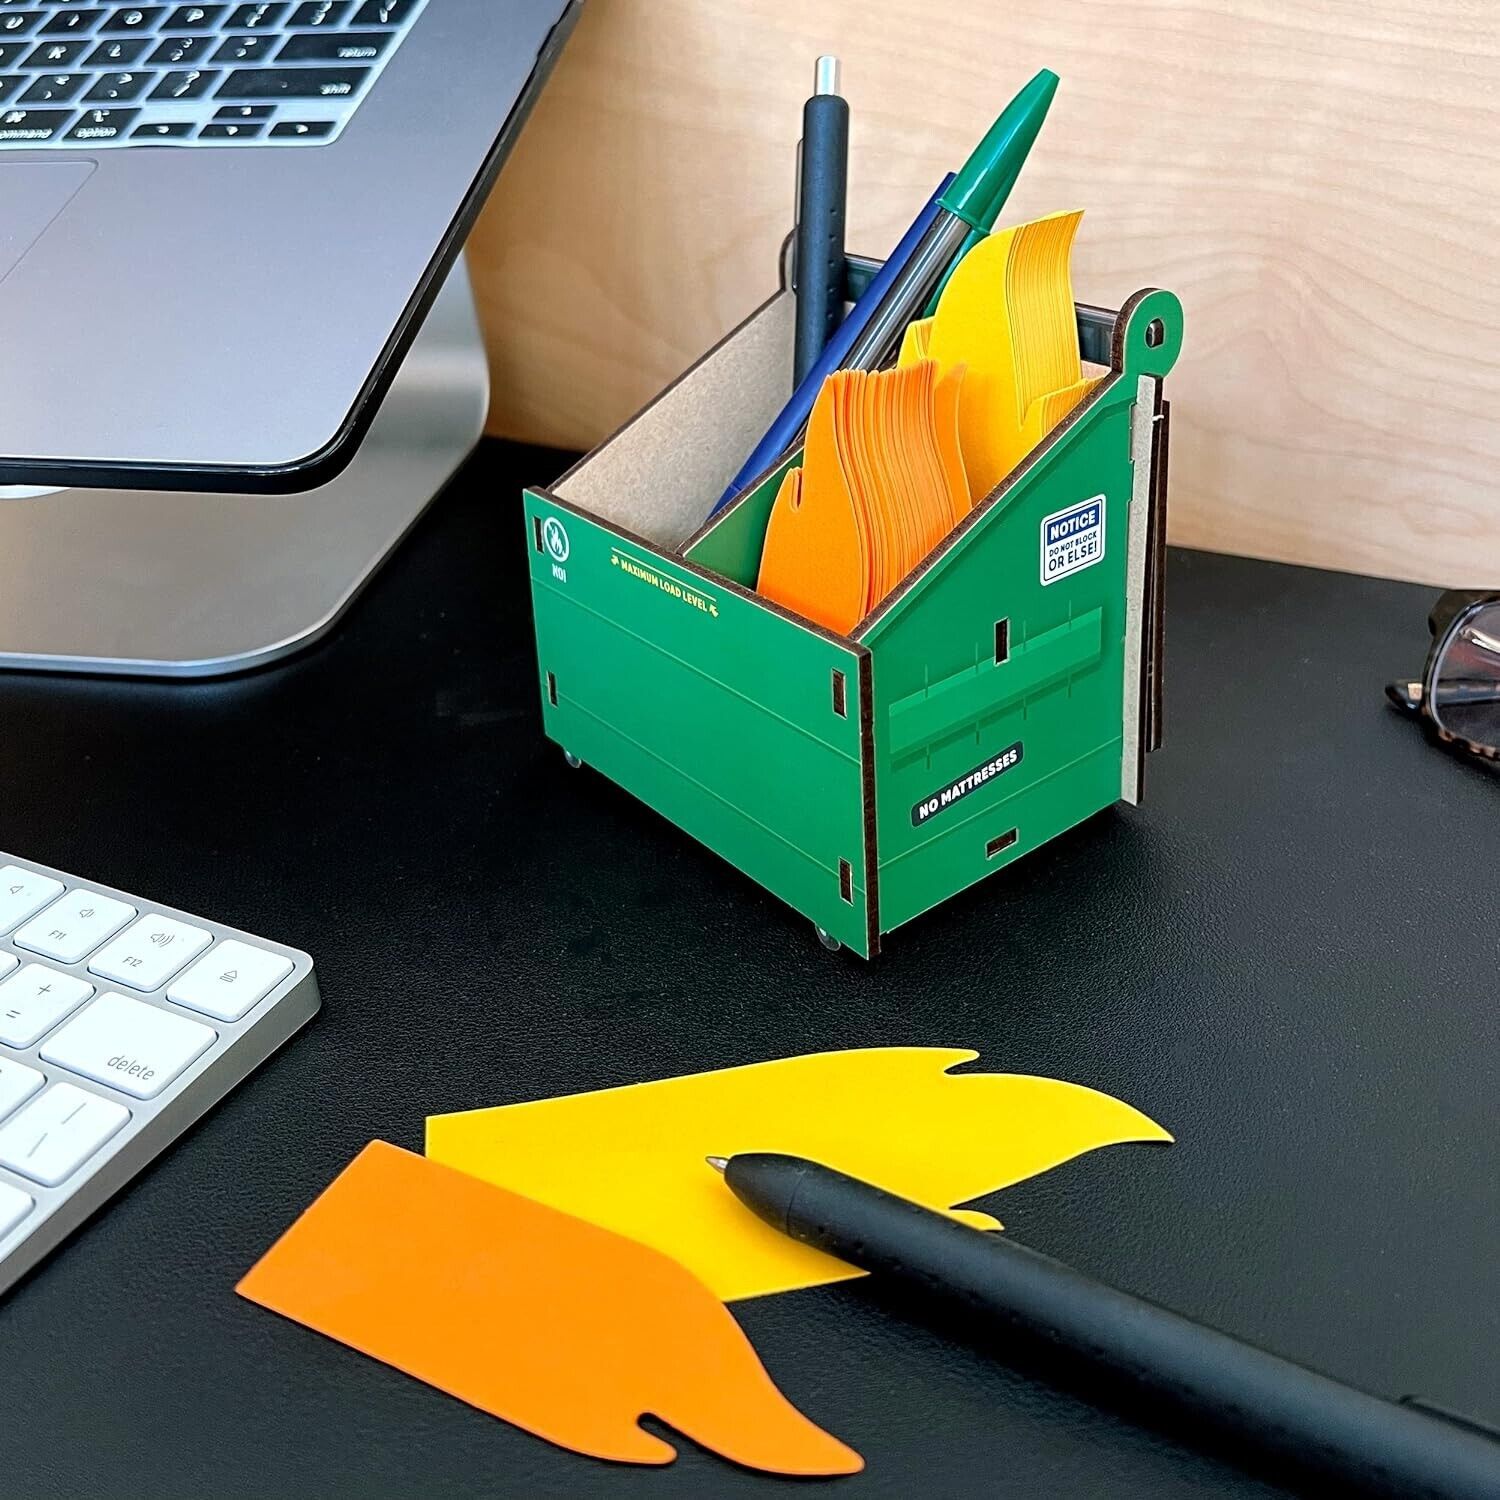 Desk Dumpster Pencil Holder with Note Cards Assorted 5280917 3 Compartments Desk